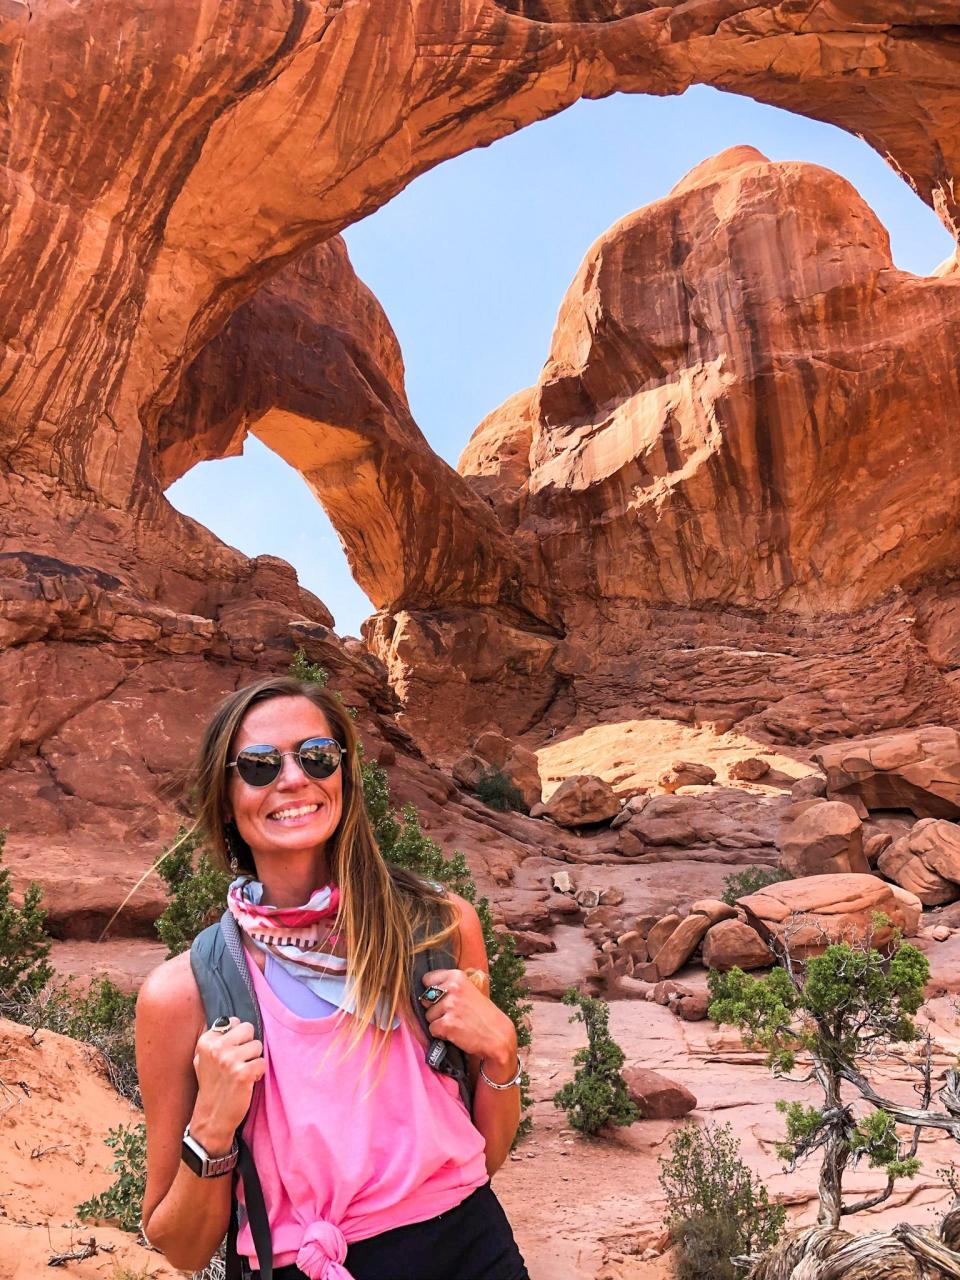 Emily, wearing a pink shirt, sunglasses, and a bandana around her neck, smiles in front of giant arches at Arches National Park.